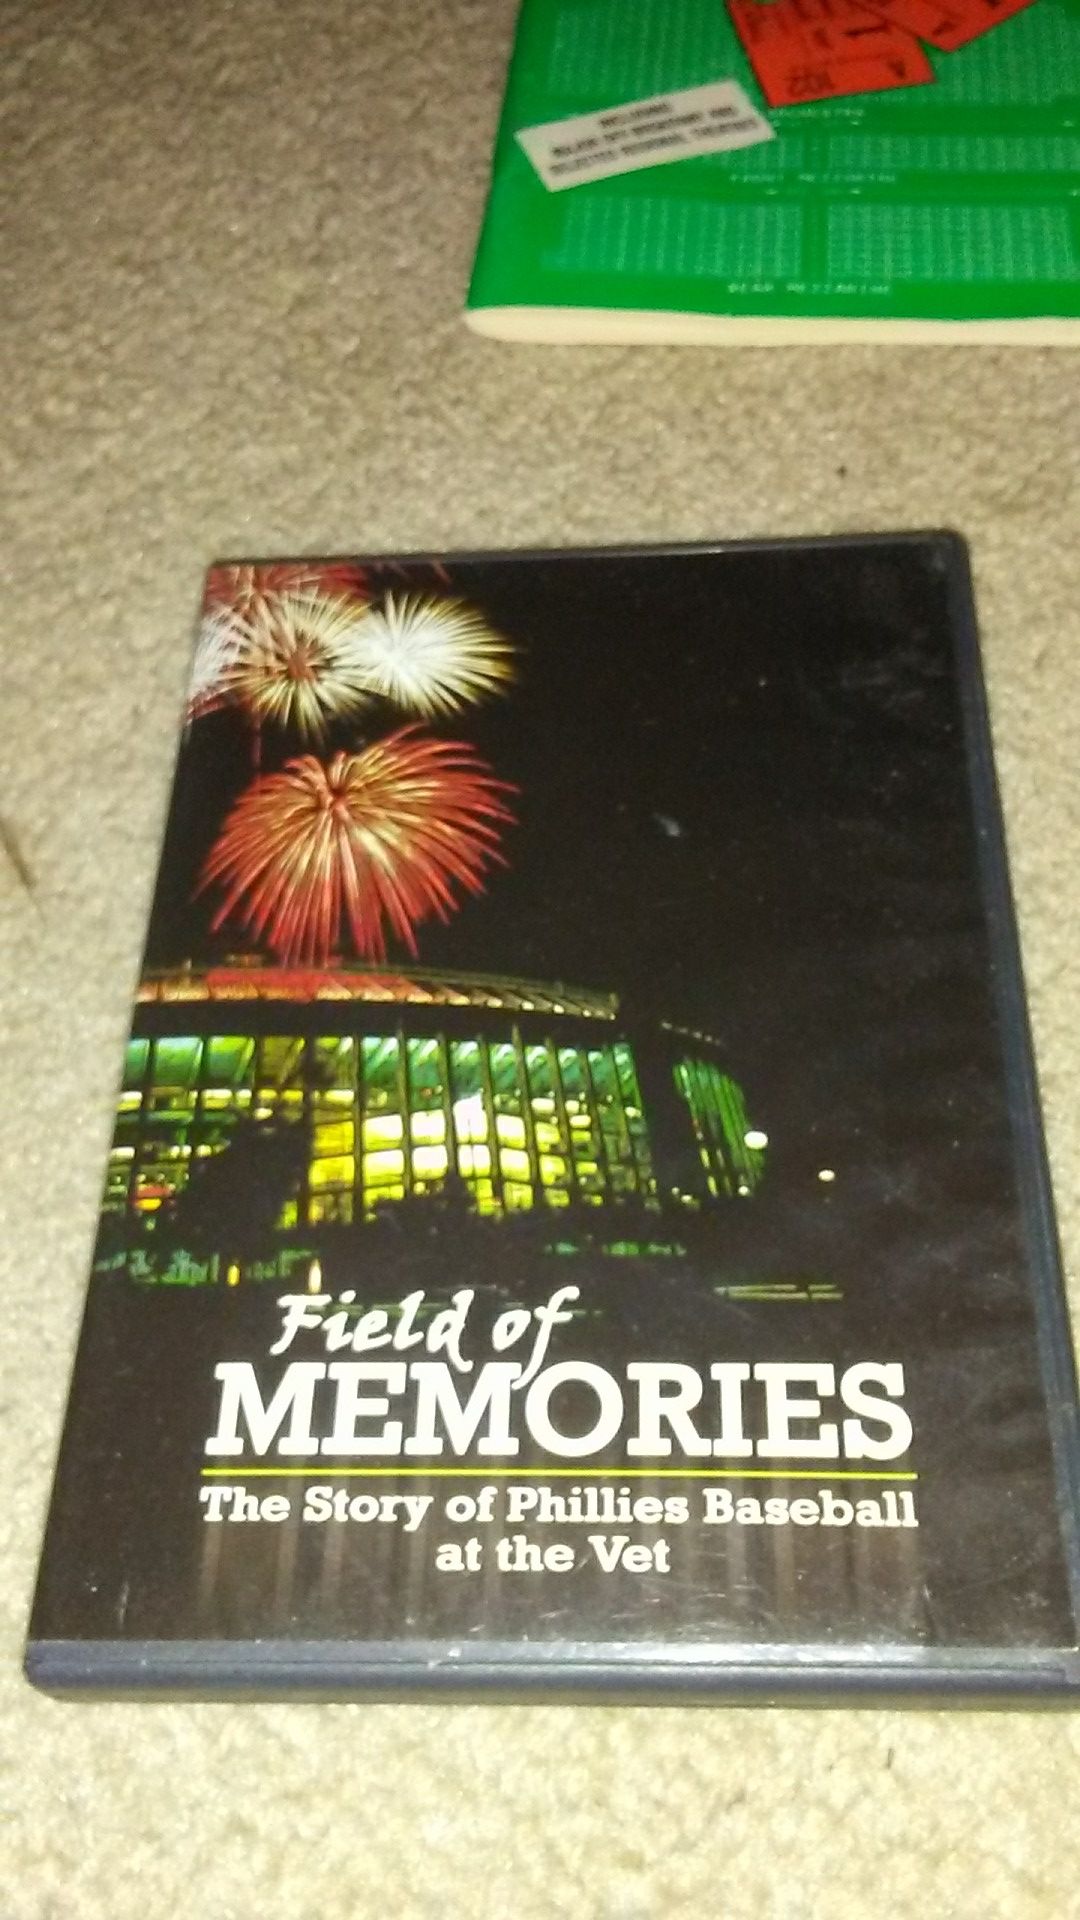 Field of Memories.....the story of Phillies Baseball at the Vet